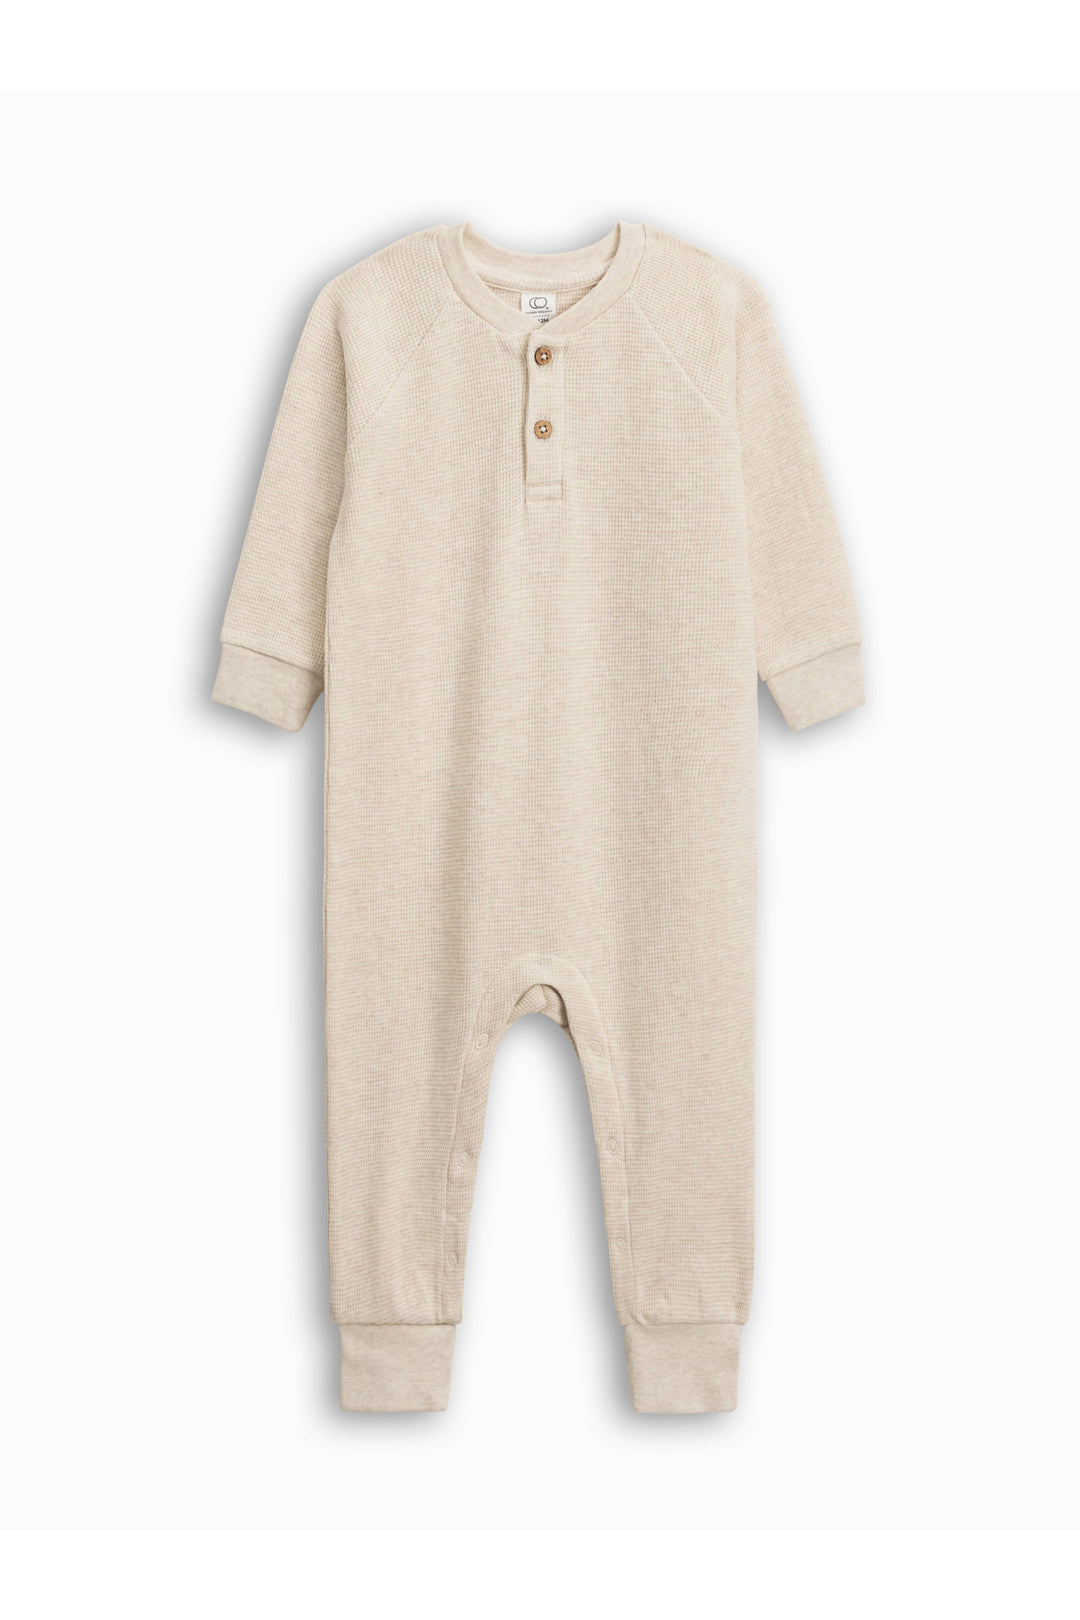 The Crosby Waffle Knit Henley Romper